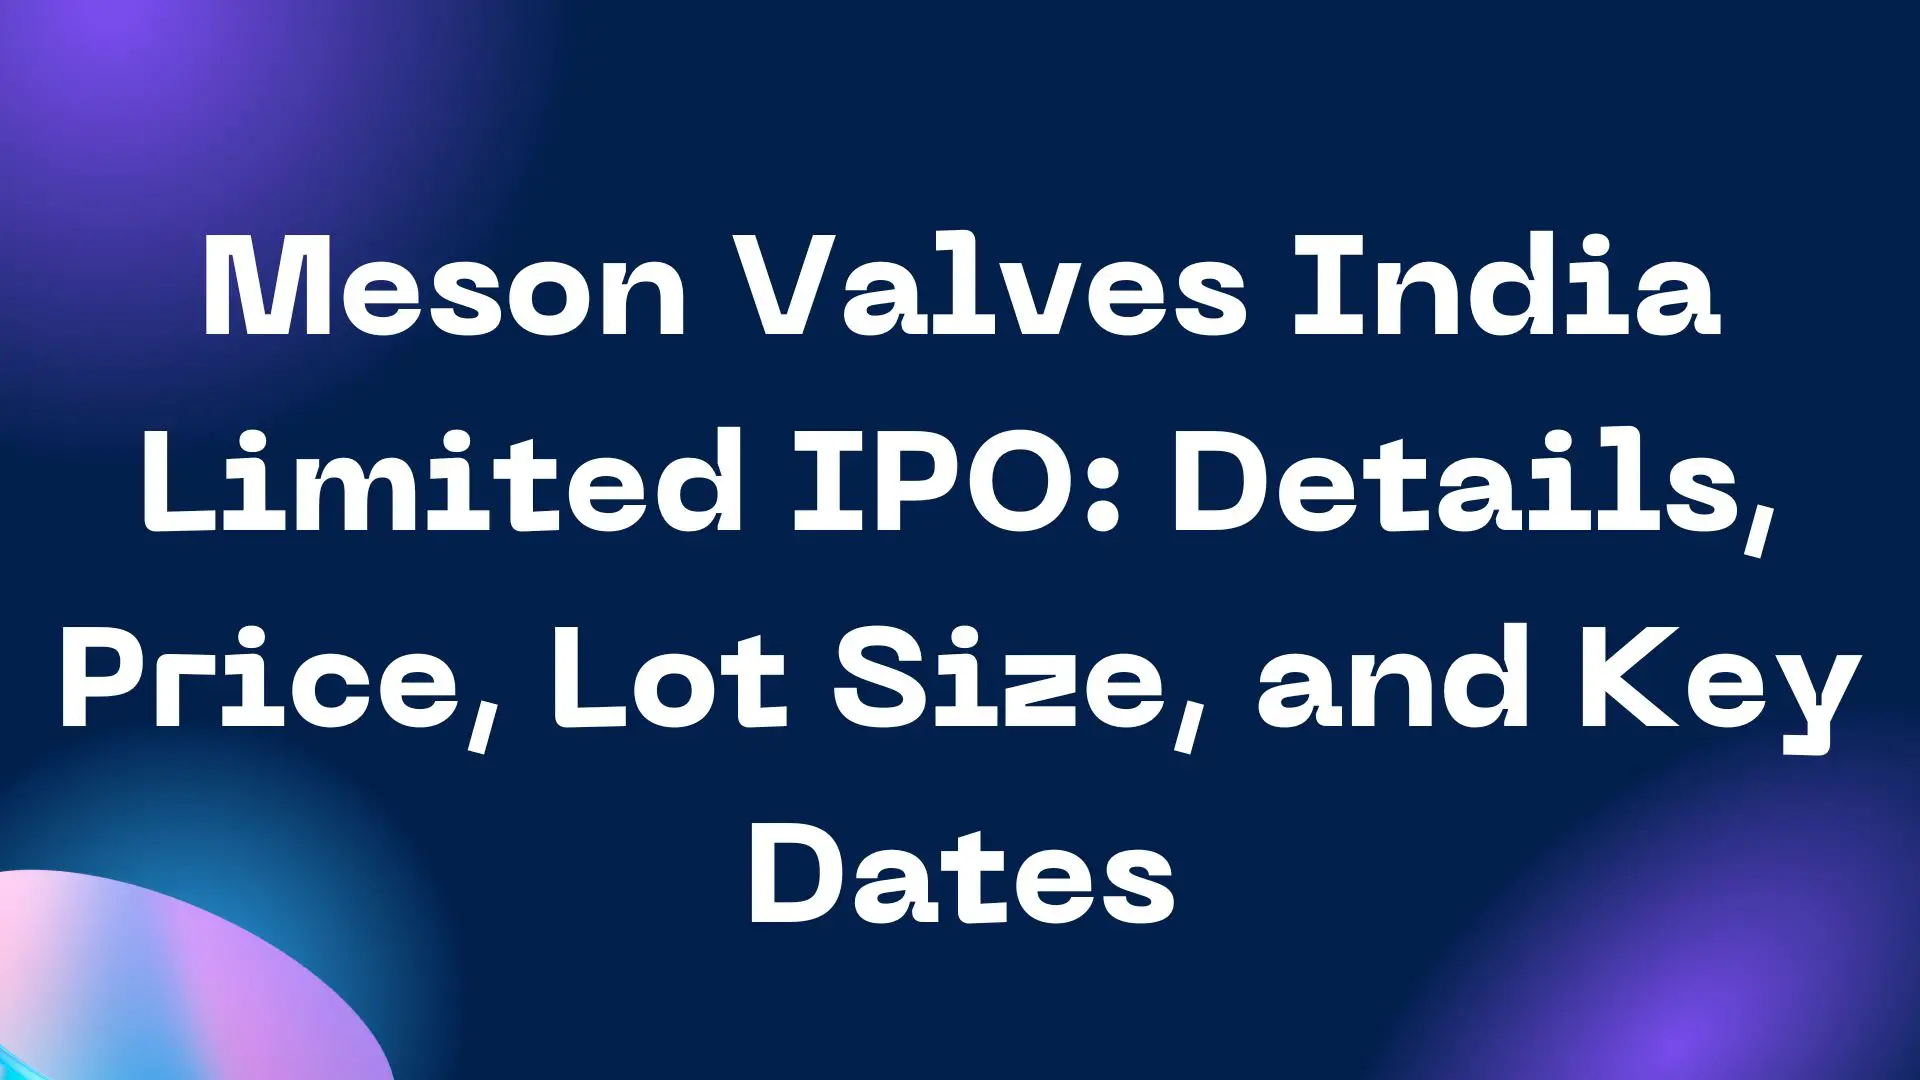 Meson Valves India Limited IPO: Details, Price, Lot Size, and Key Dates